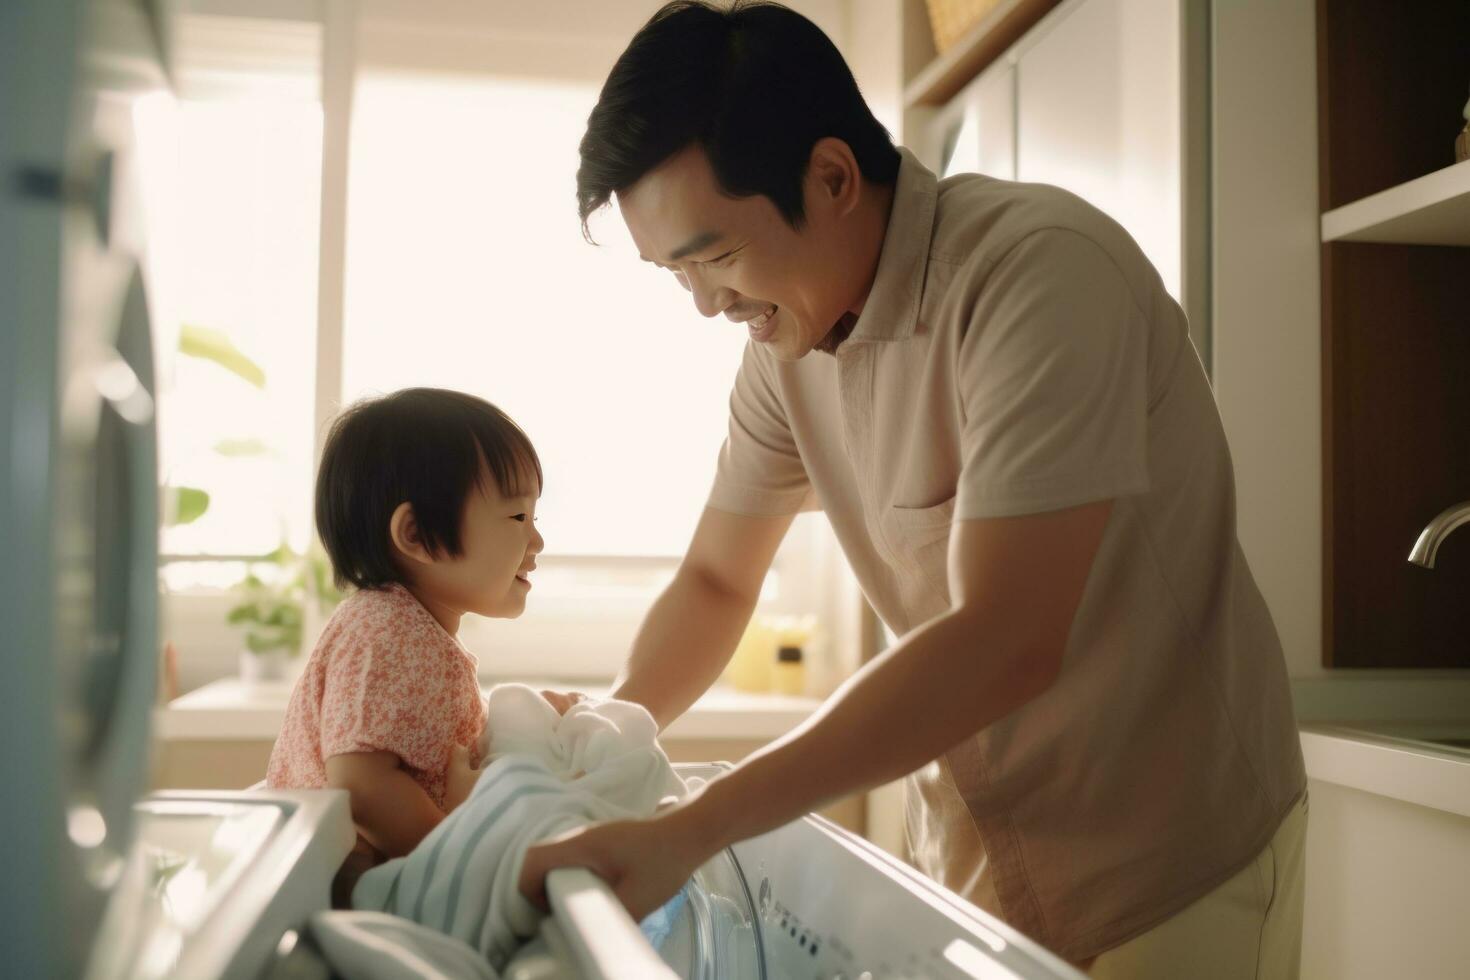 Father and Son Doing Laundry Together to load the washing machine with dirty clothes photo